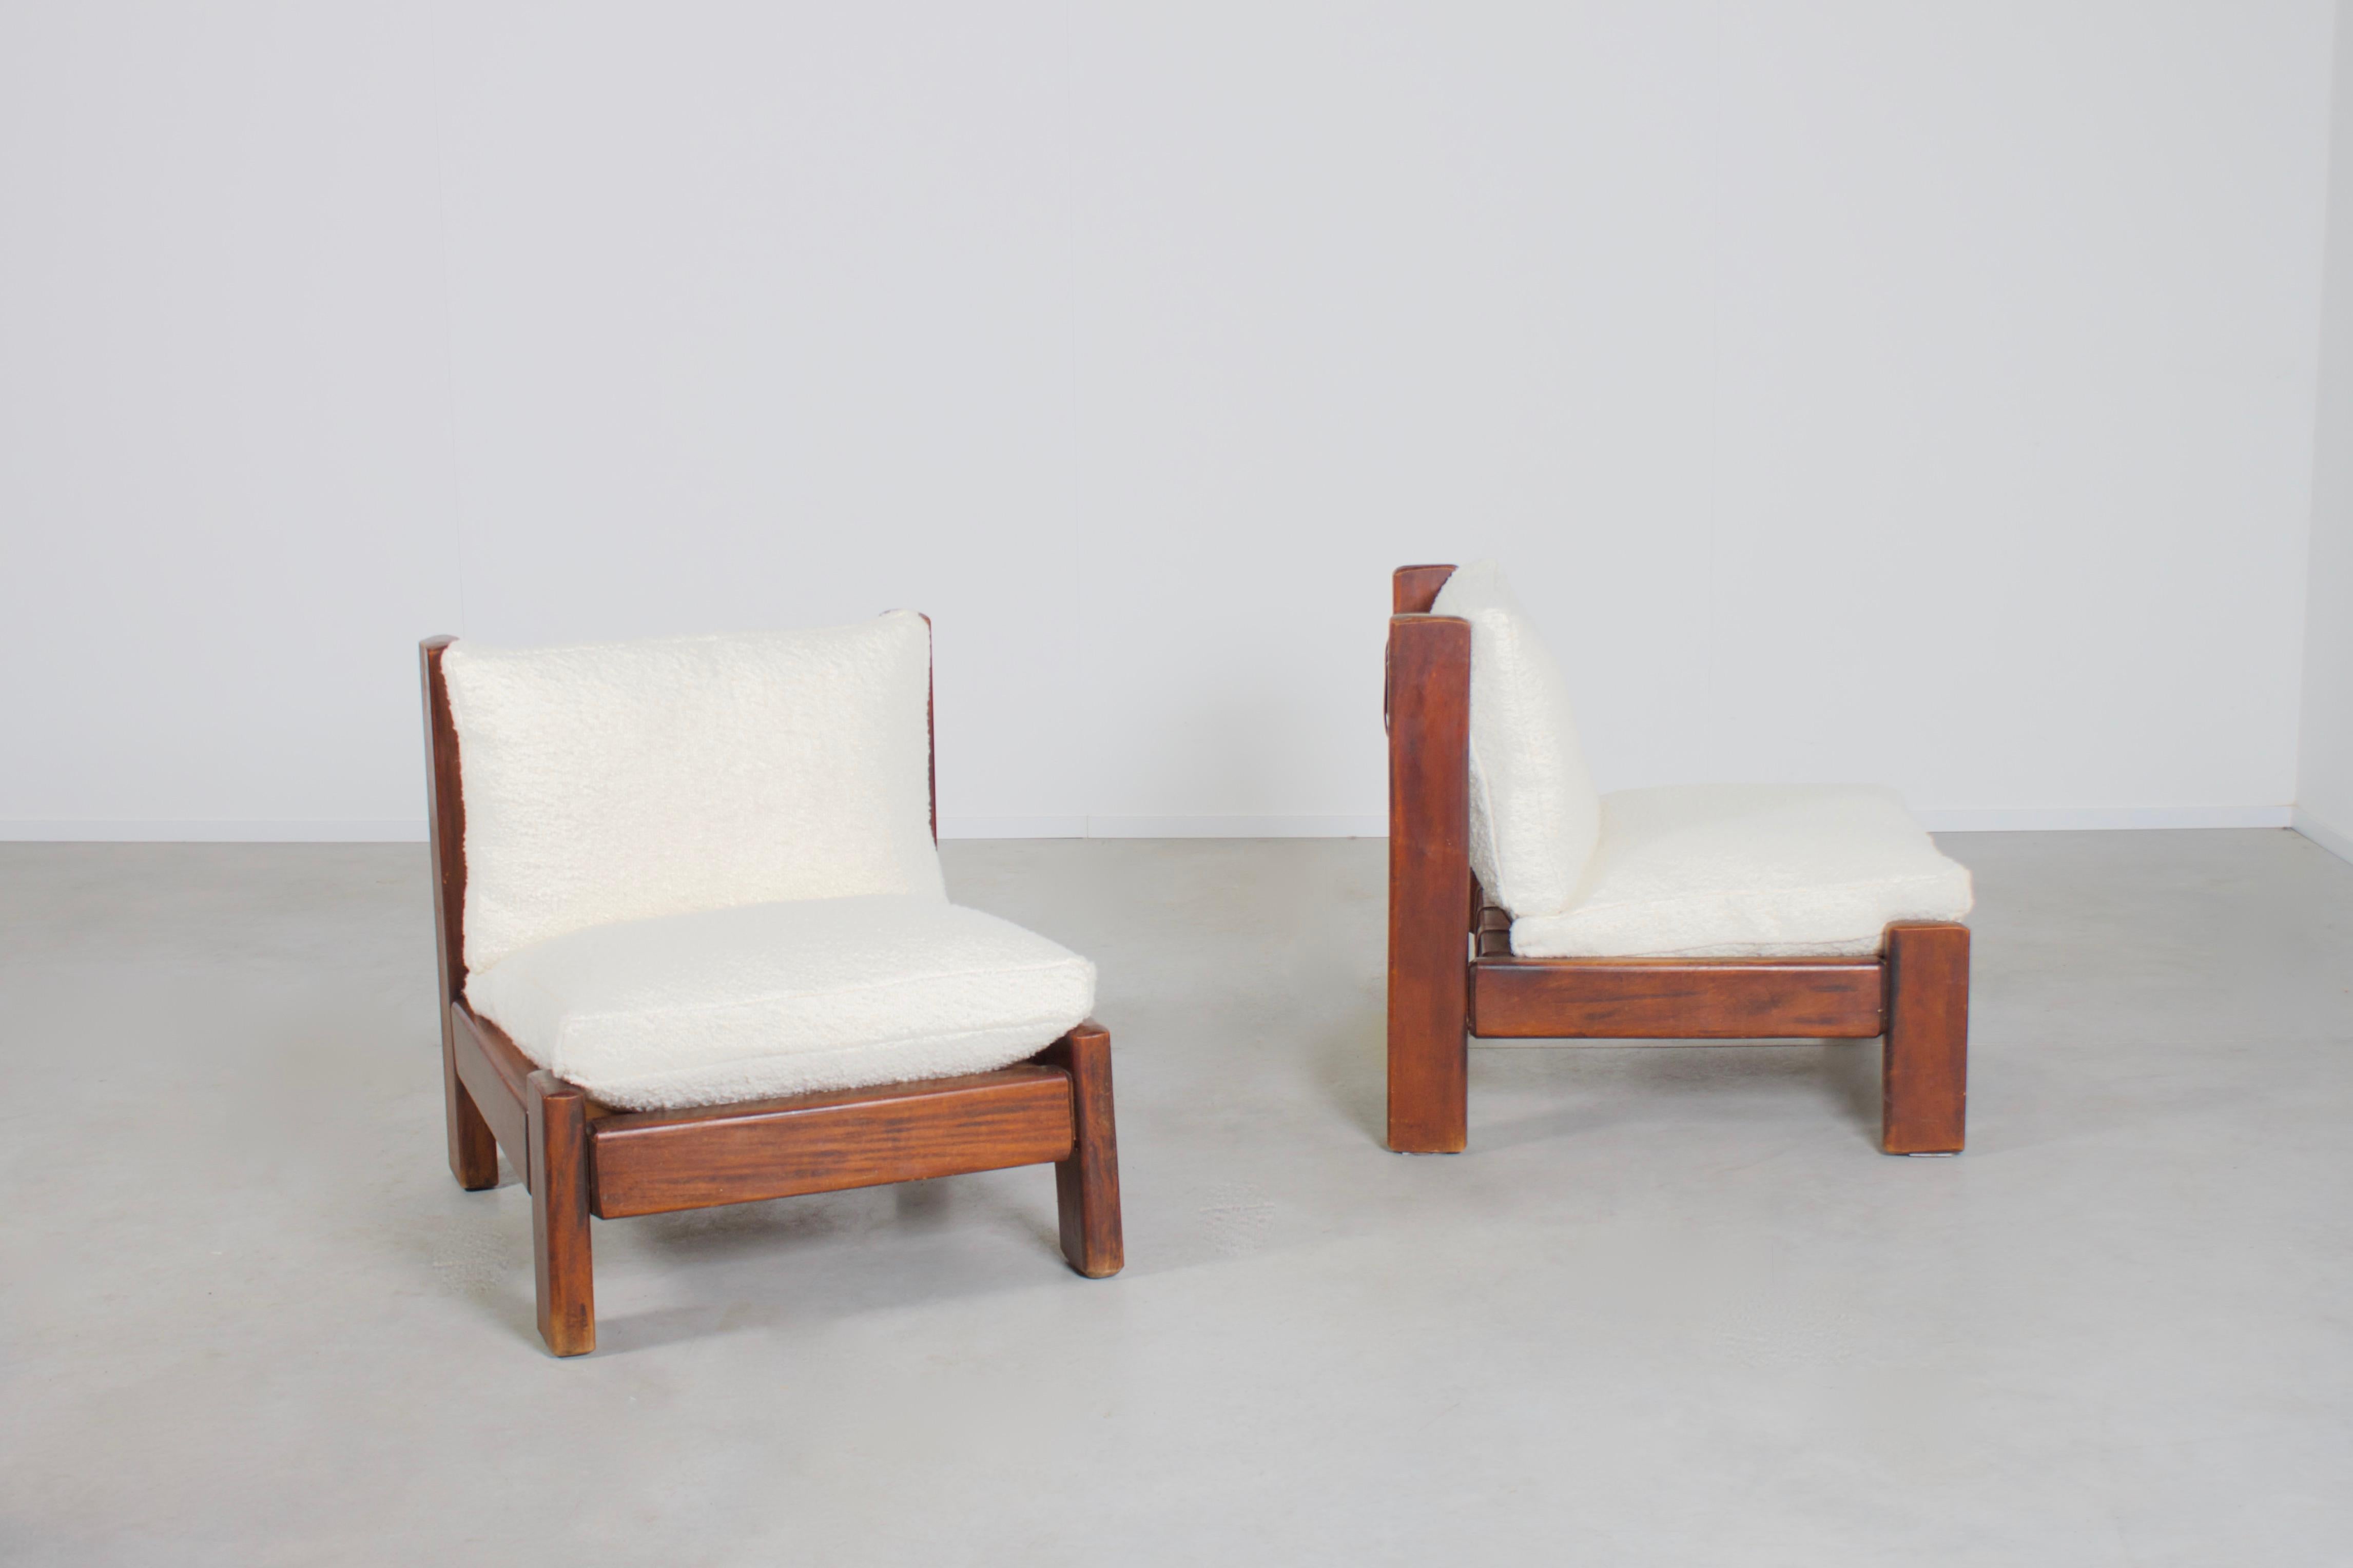 Set of low Brazilian lounge chairs in good condition.

Designed in the 1960s

These chairs have a solid tropical hardwood frame which has leather straps spanned to support the 
back cushion.

The seat and the back cushions have a loose character and